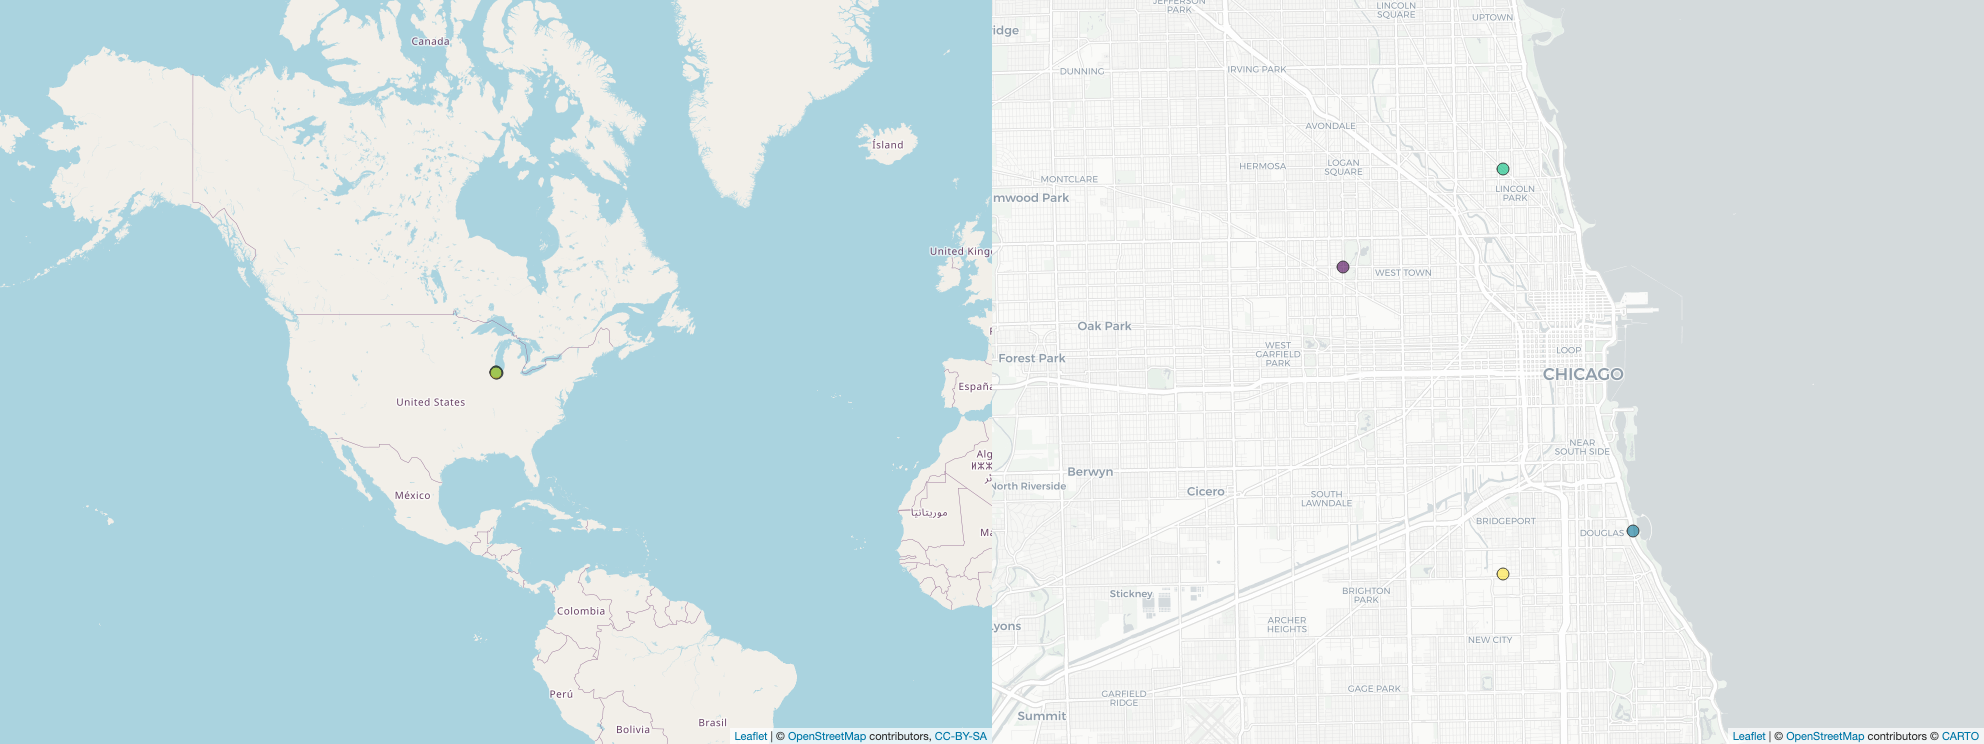 Two maps for the points in Chicago. The left one is zoomed out at the scale of the US while the right one is zoomed in to the city itself.